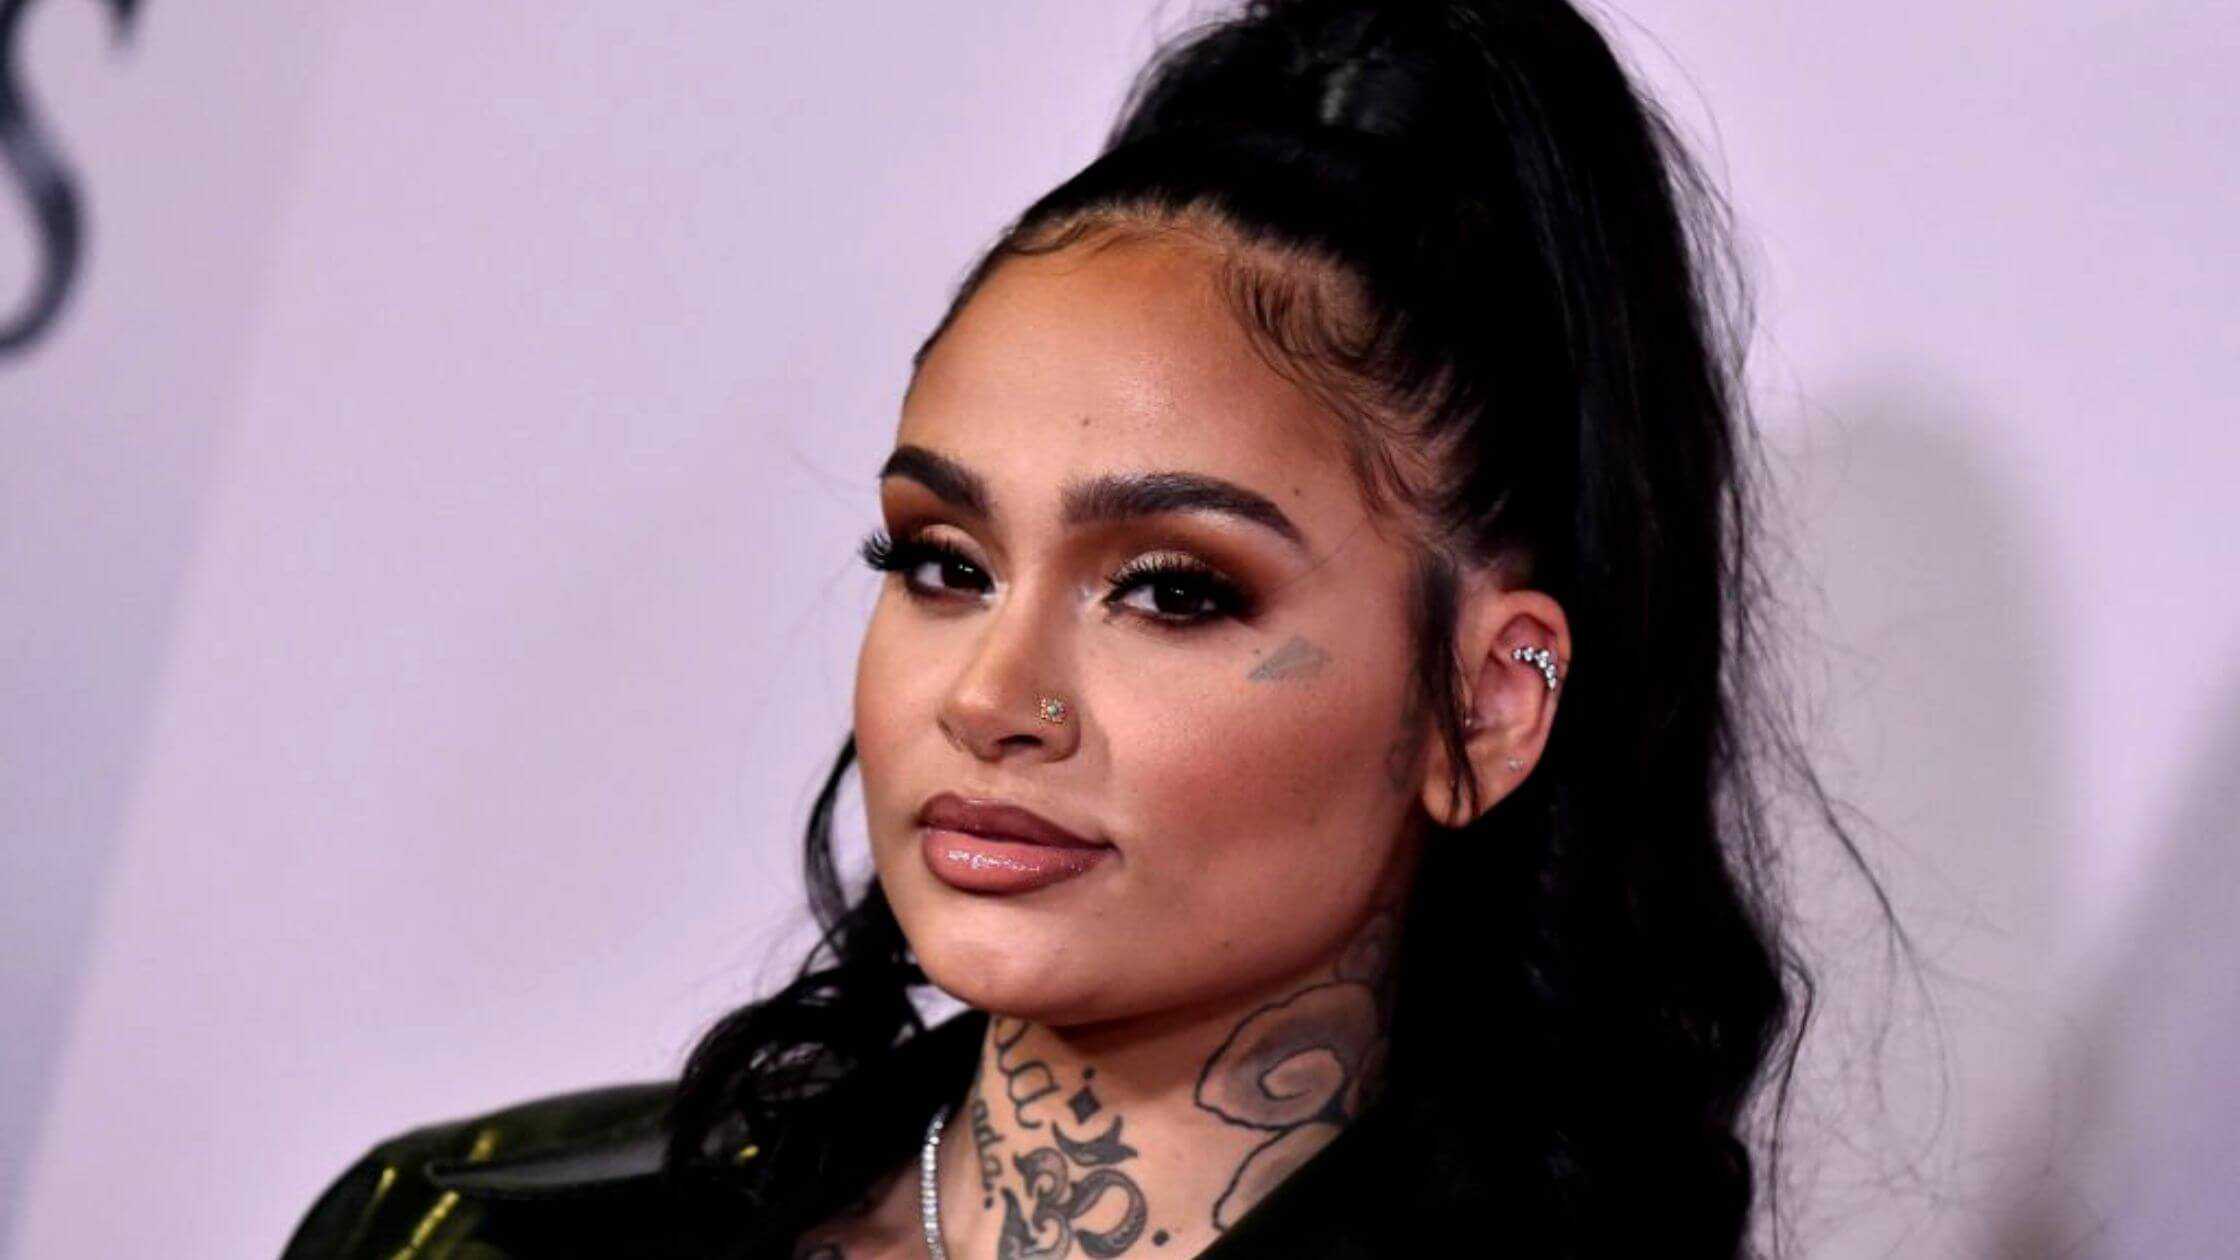 Kehlani Sets Boundaries With Her Fans After The Sexual Assault Allegation